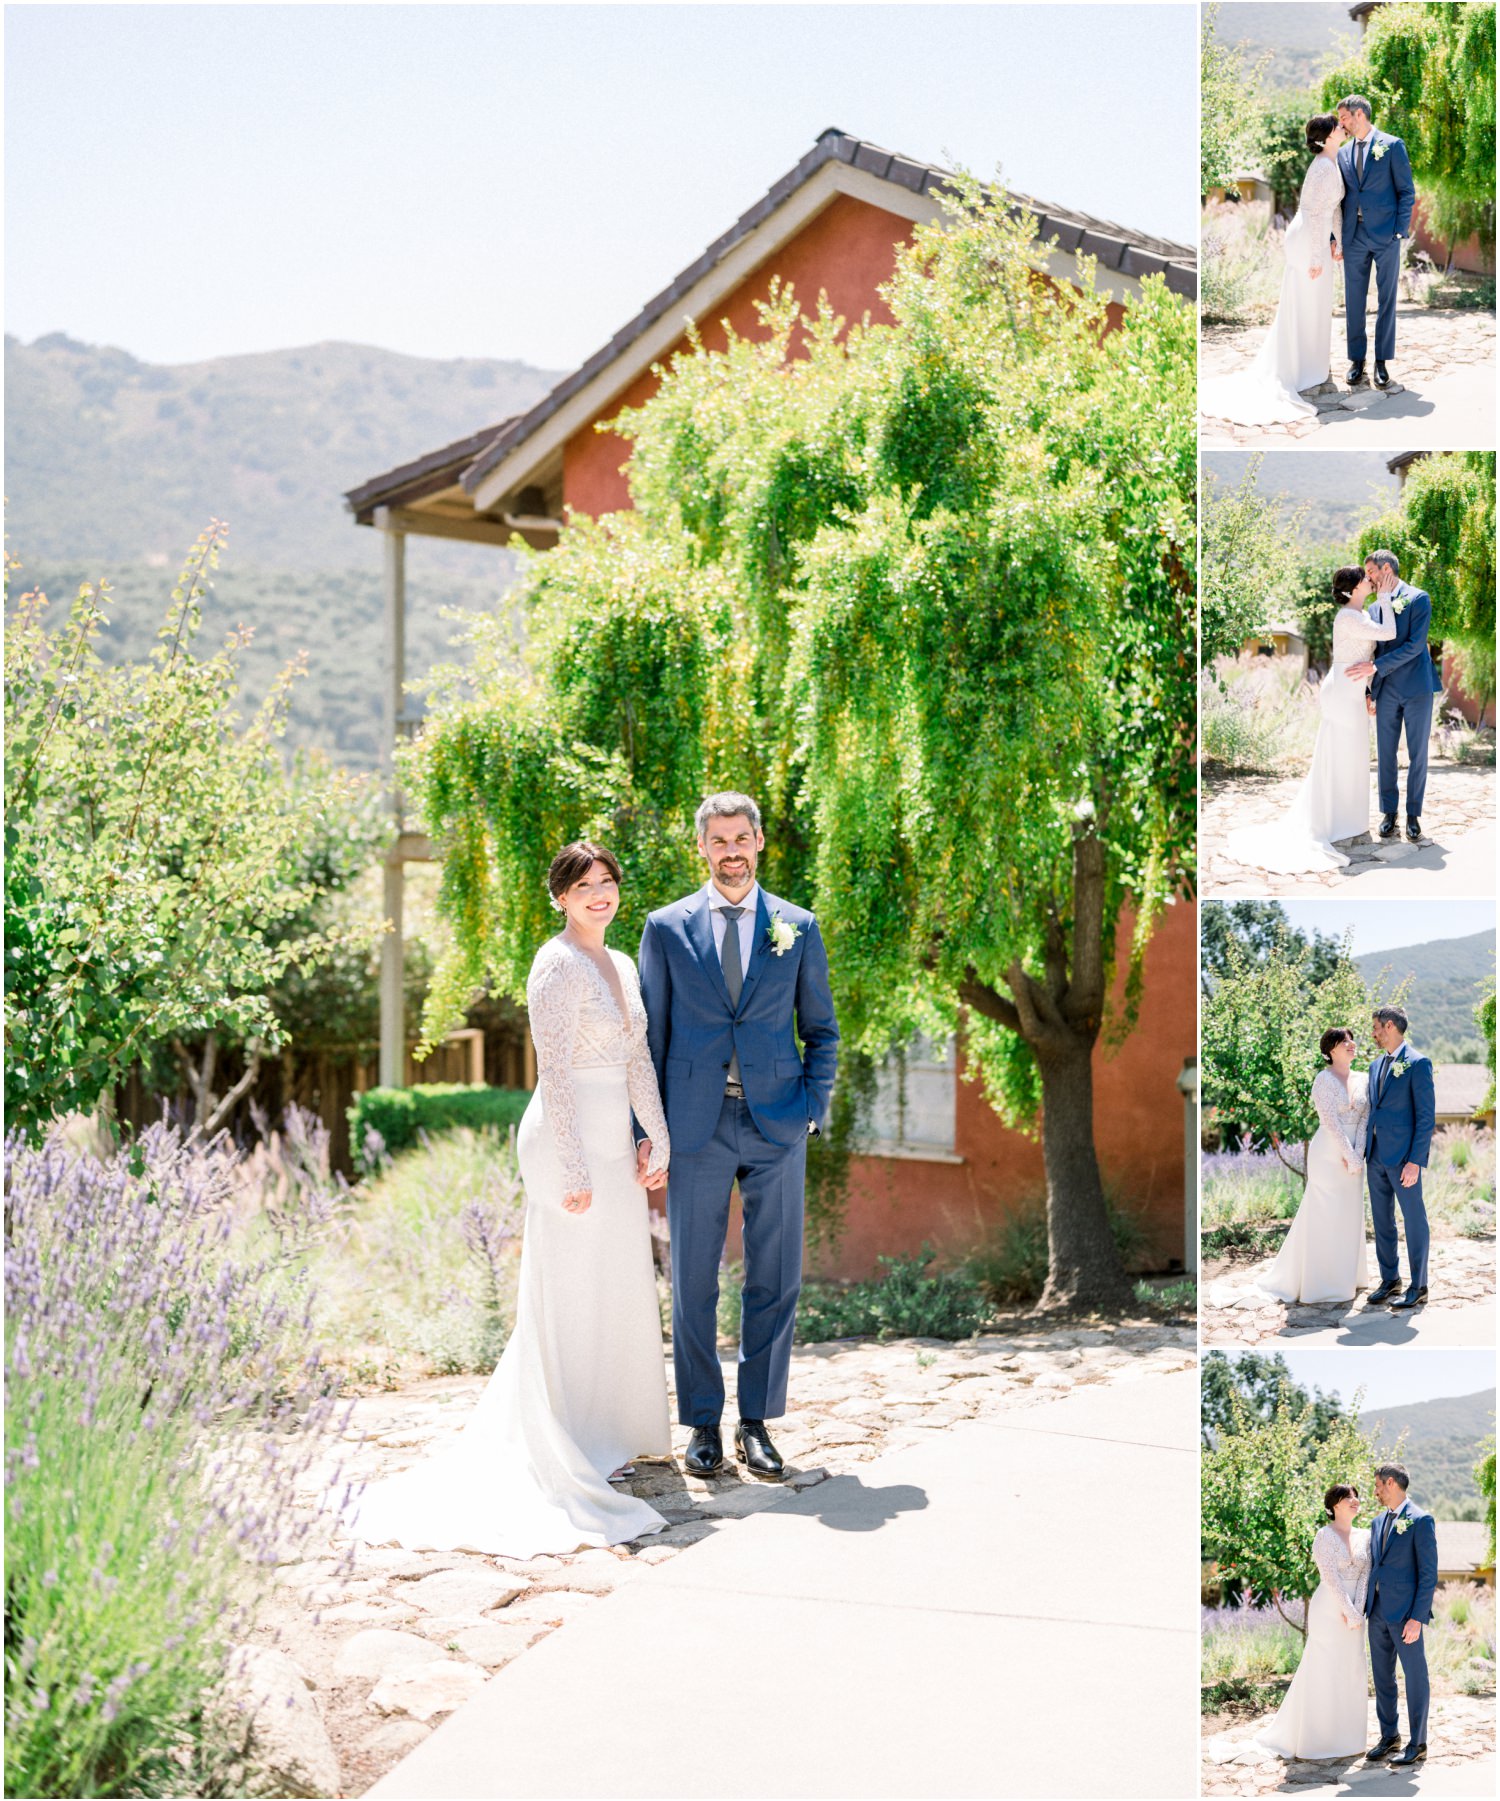 Bride and groom standing in front of tree and red building